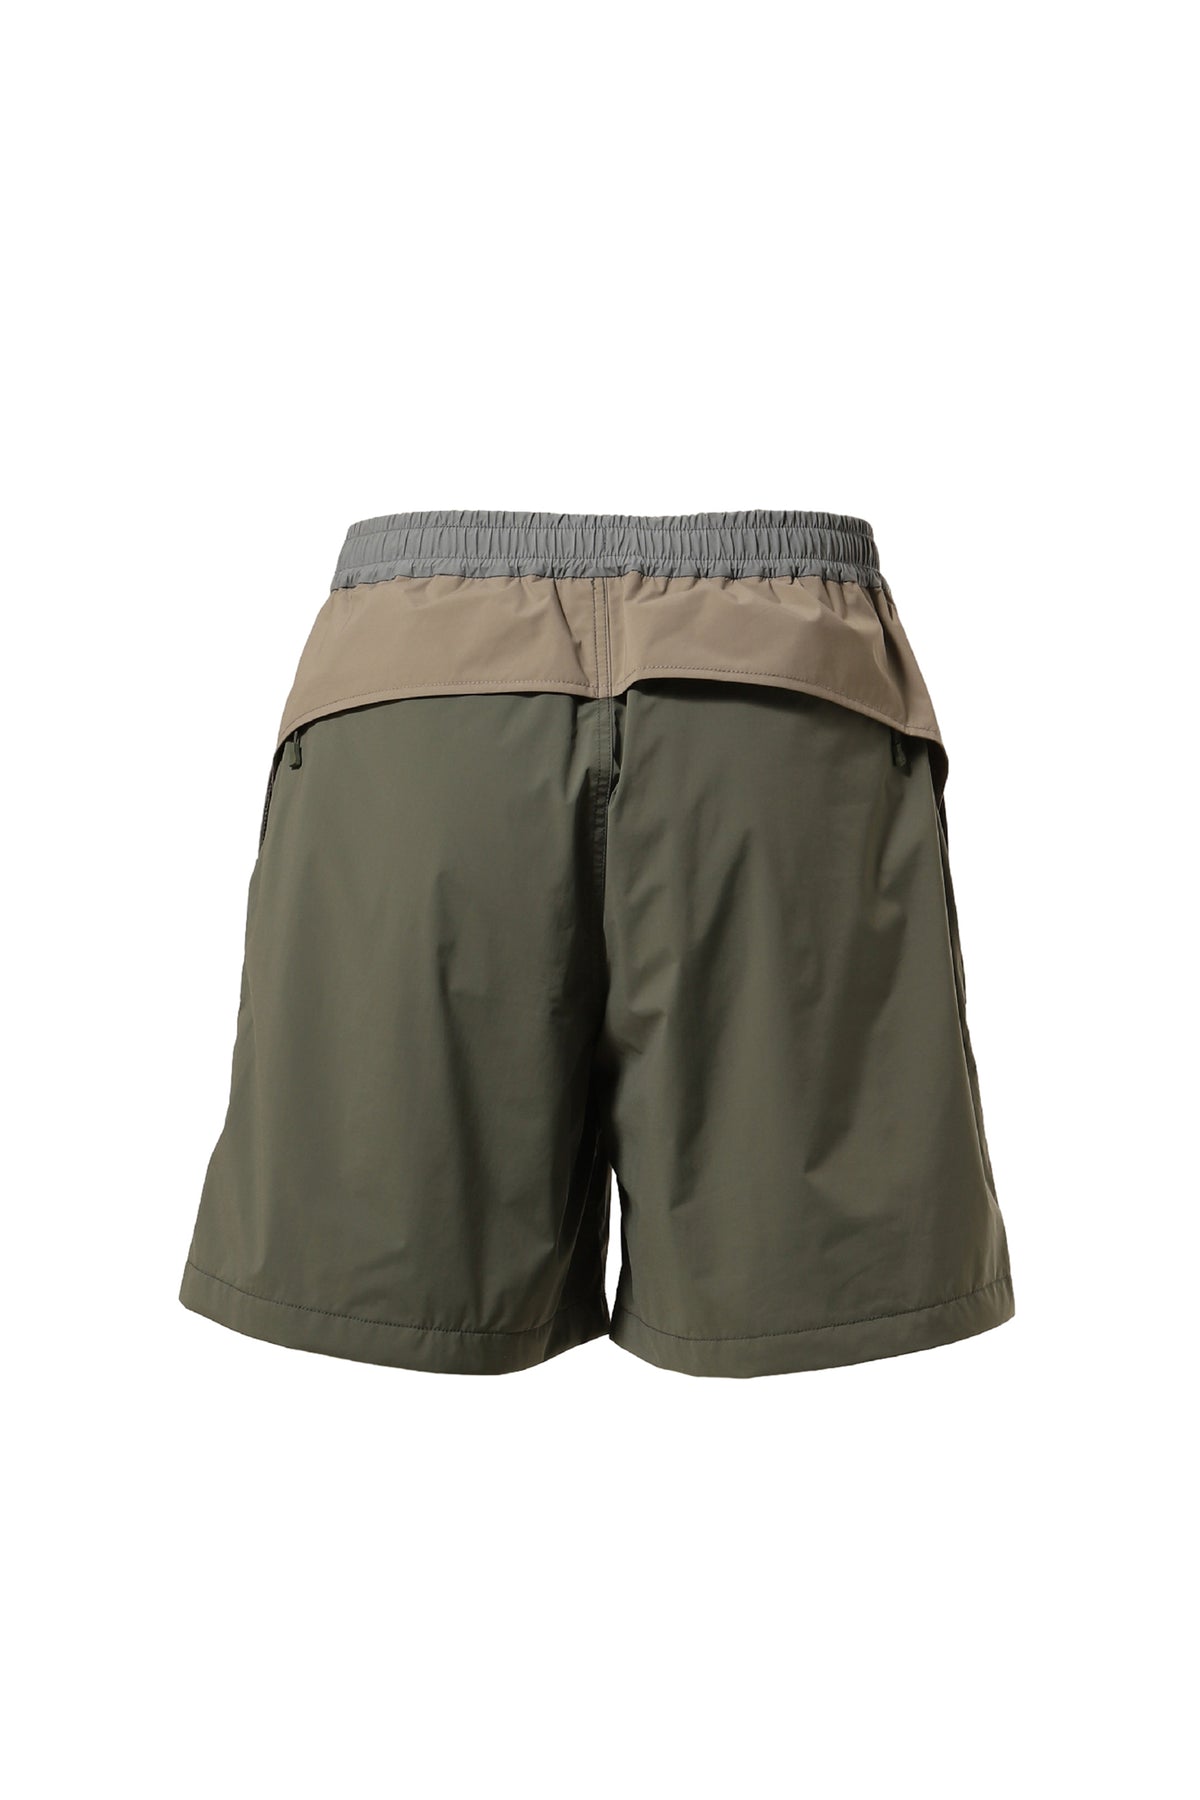 TECH STORM MOUTAIN SHORTS / SAGE/BEI/GRY